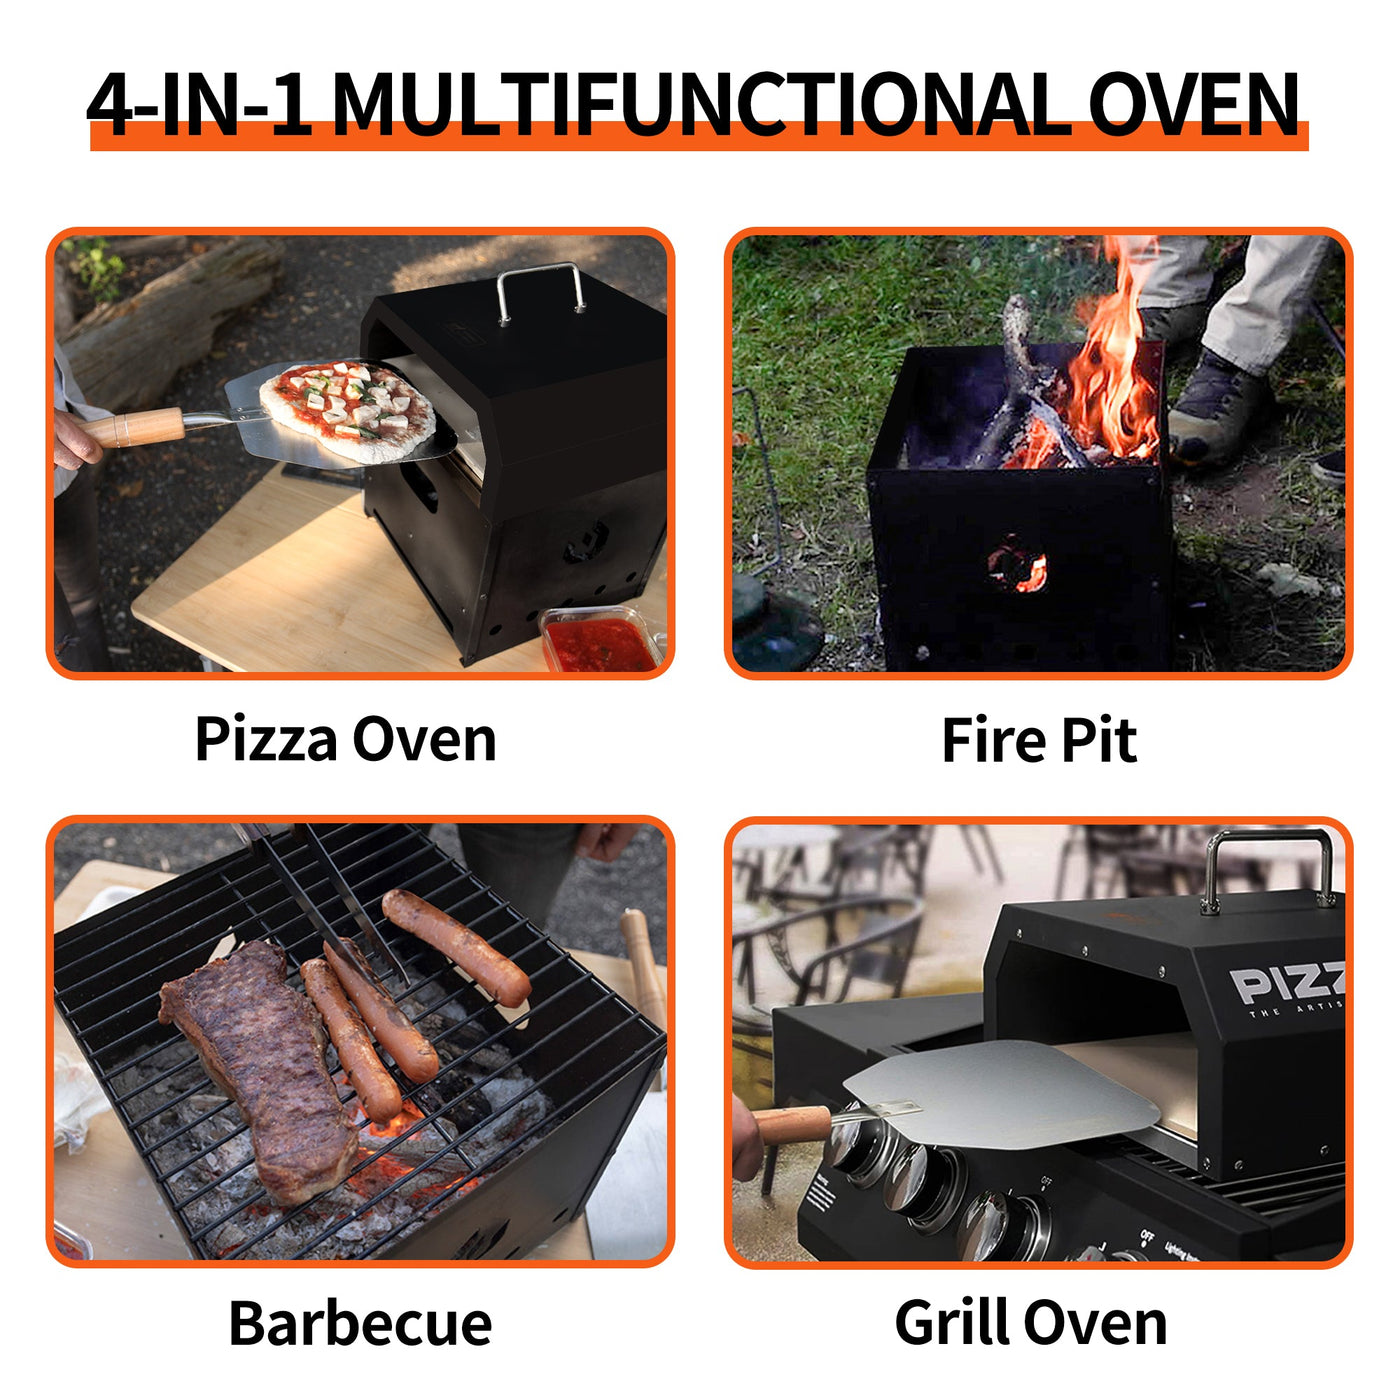 Pizzello Gusto - 4 in 1 Outdoor Pizza Oven - Pizzello